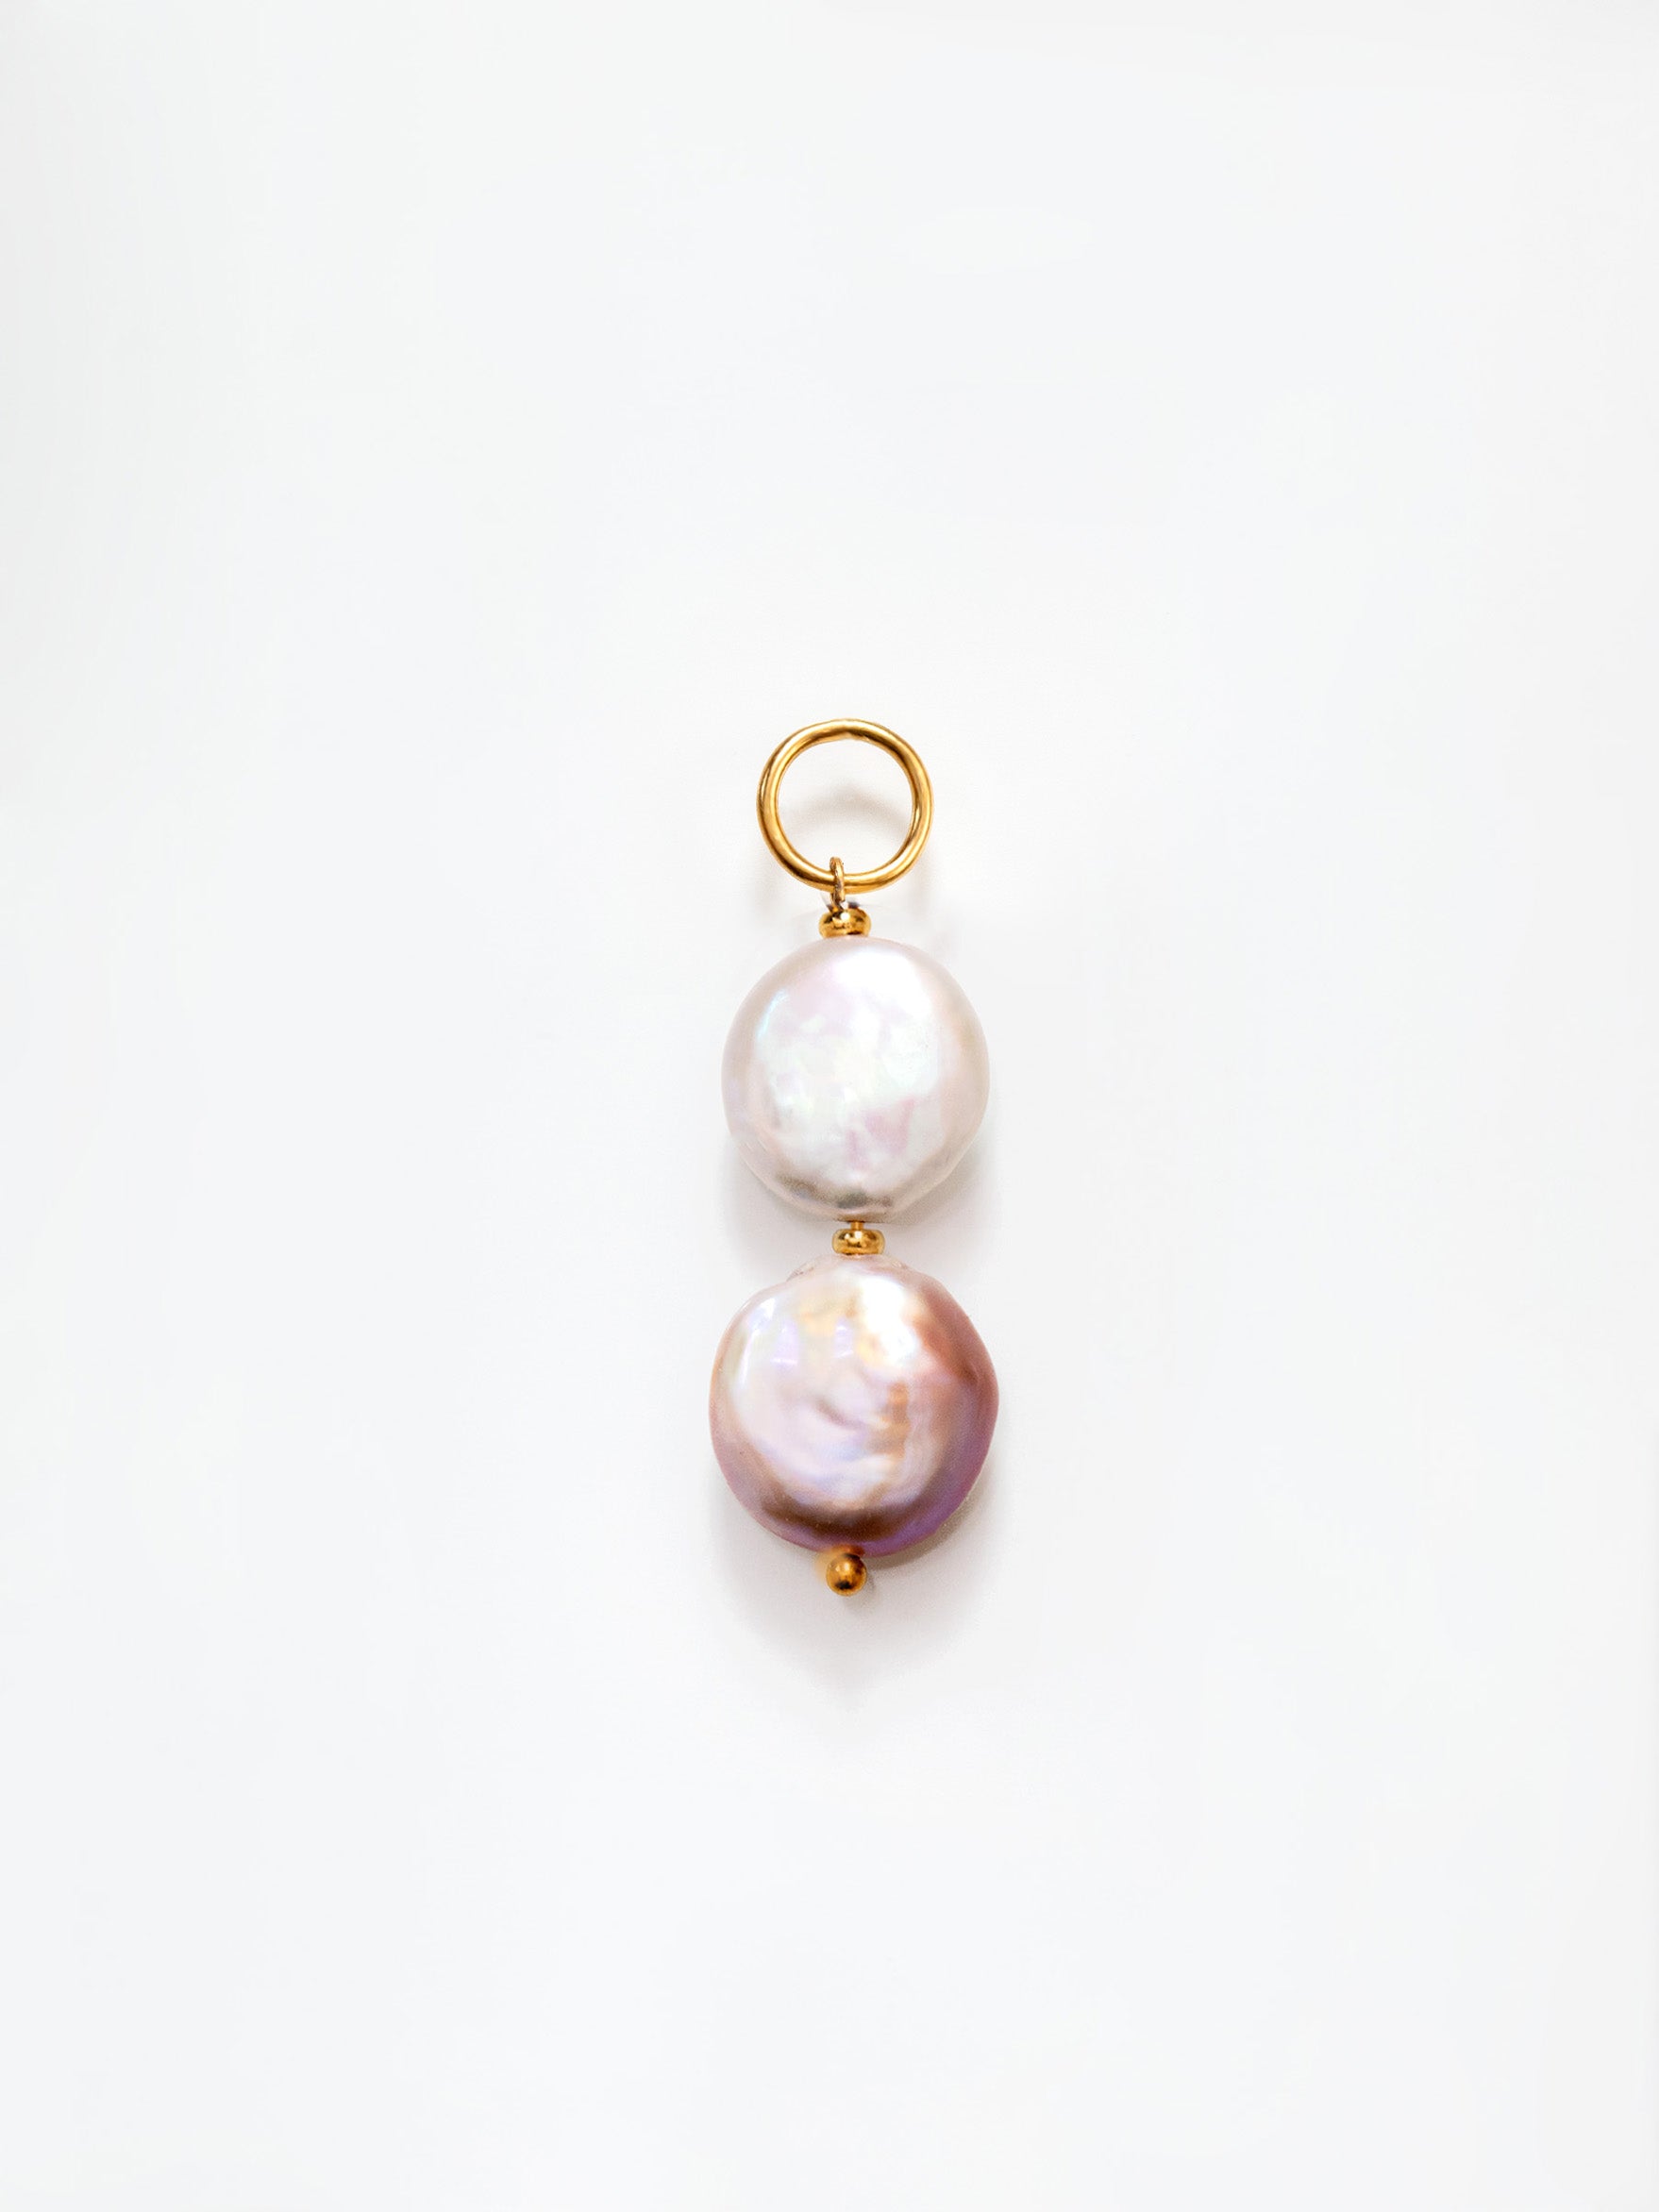 Gold Pendant / Charm With Two Baroque Button Pearls (White & Purple)